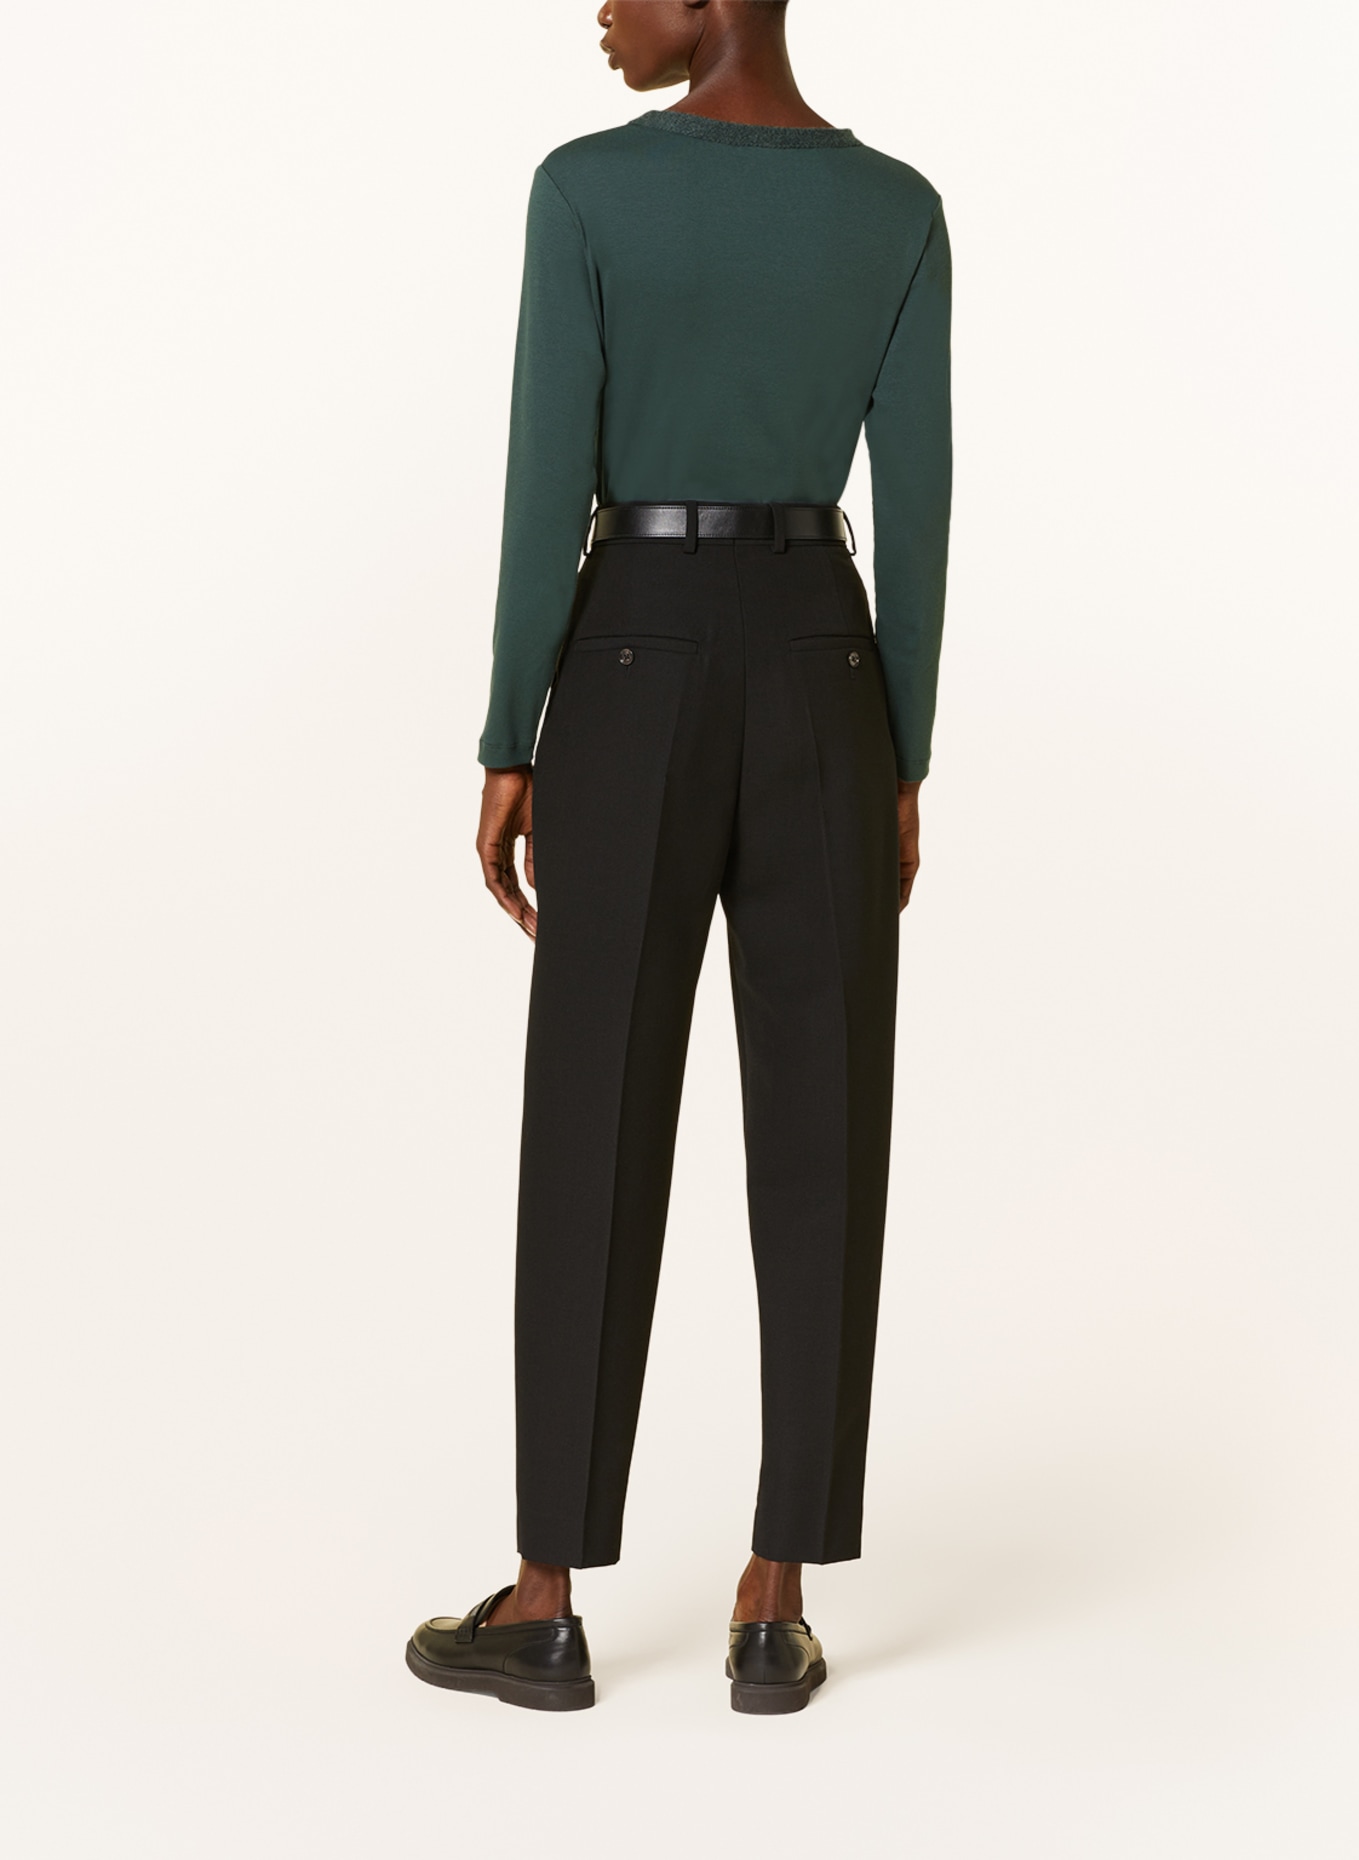 FABIANA FILIPPI Long sleeve shirt with sequins, Color: TEAL (Image 3)